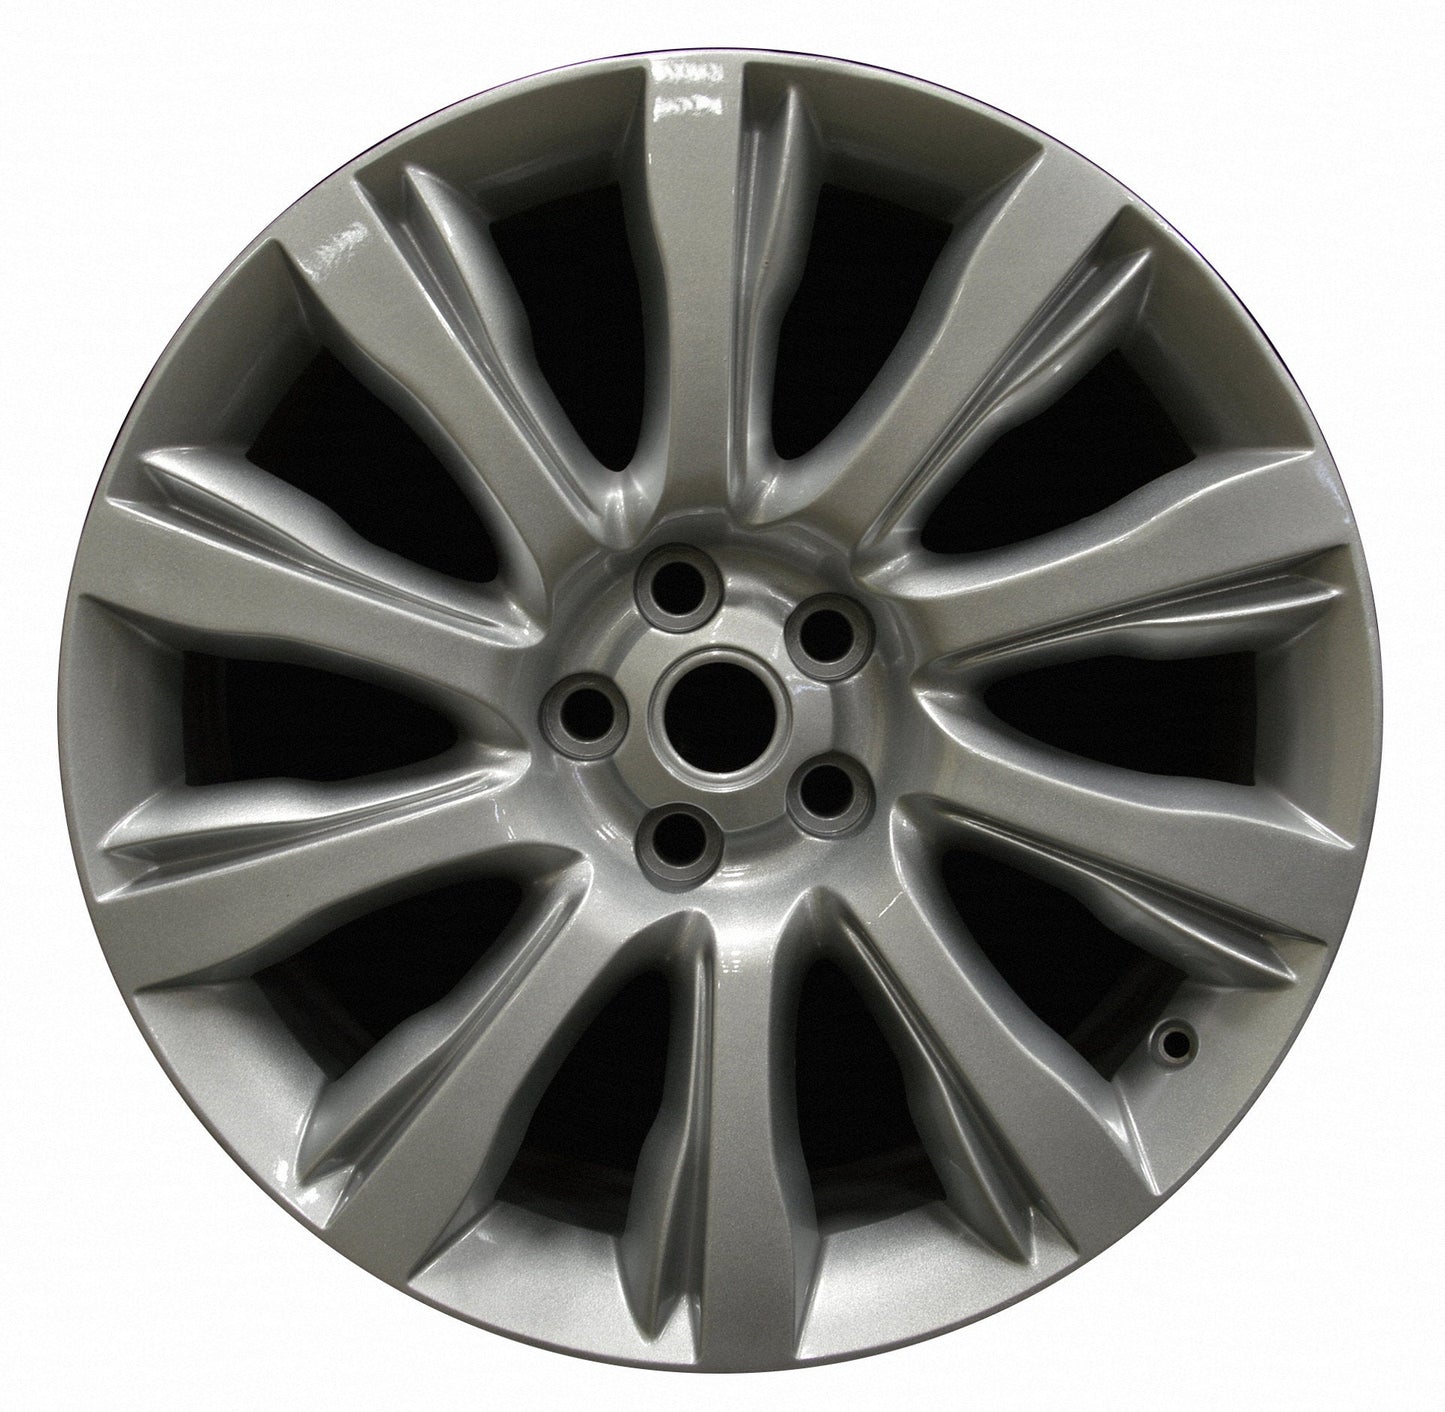 Land Rover Range Rover  2013, 2014, 2015, 2016, 2017 Factory OEM Car Wheel Size 21x9.5 Alloy WAO.72246.PS08.FF